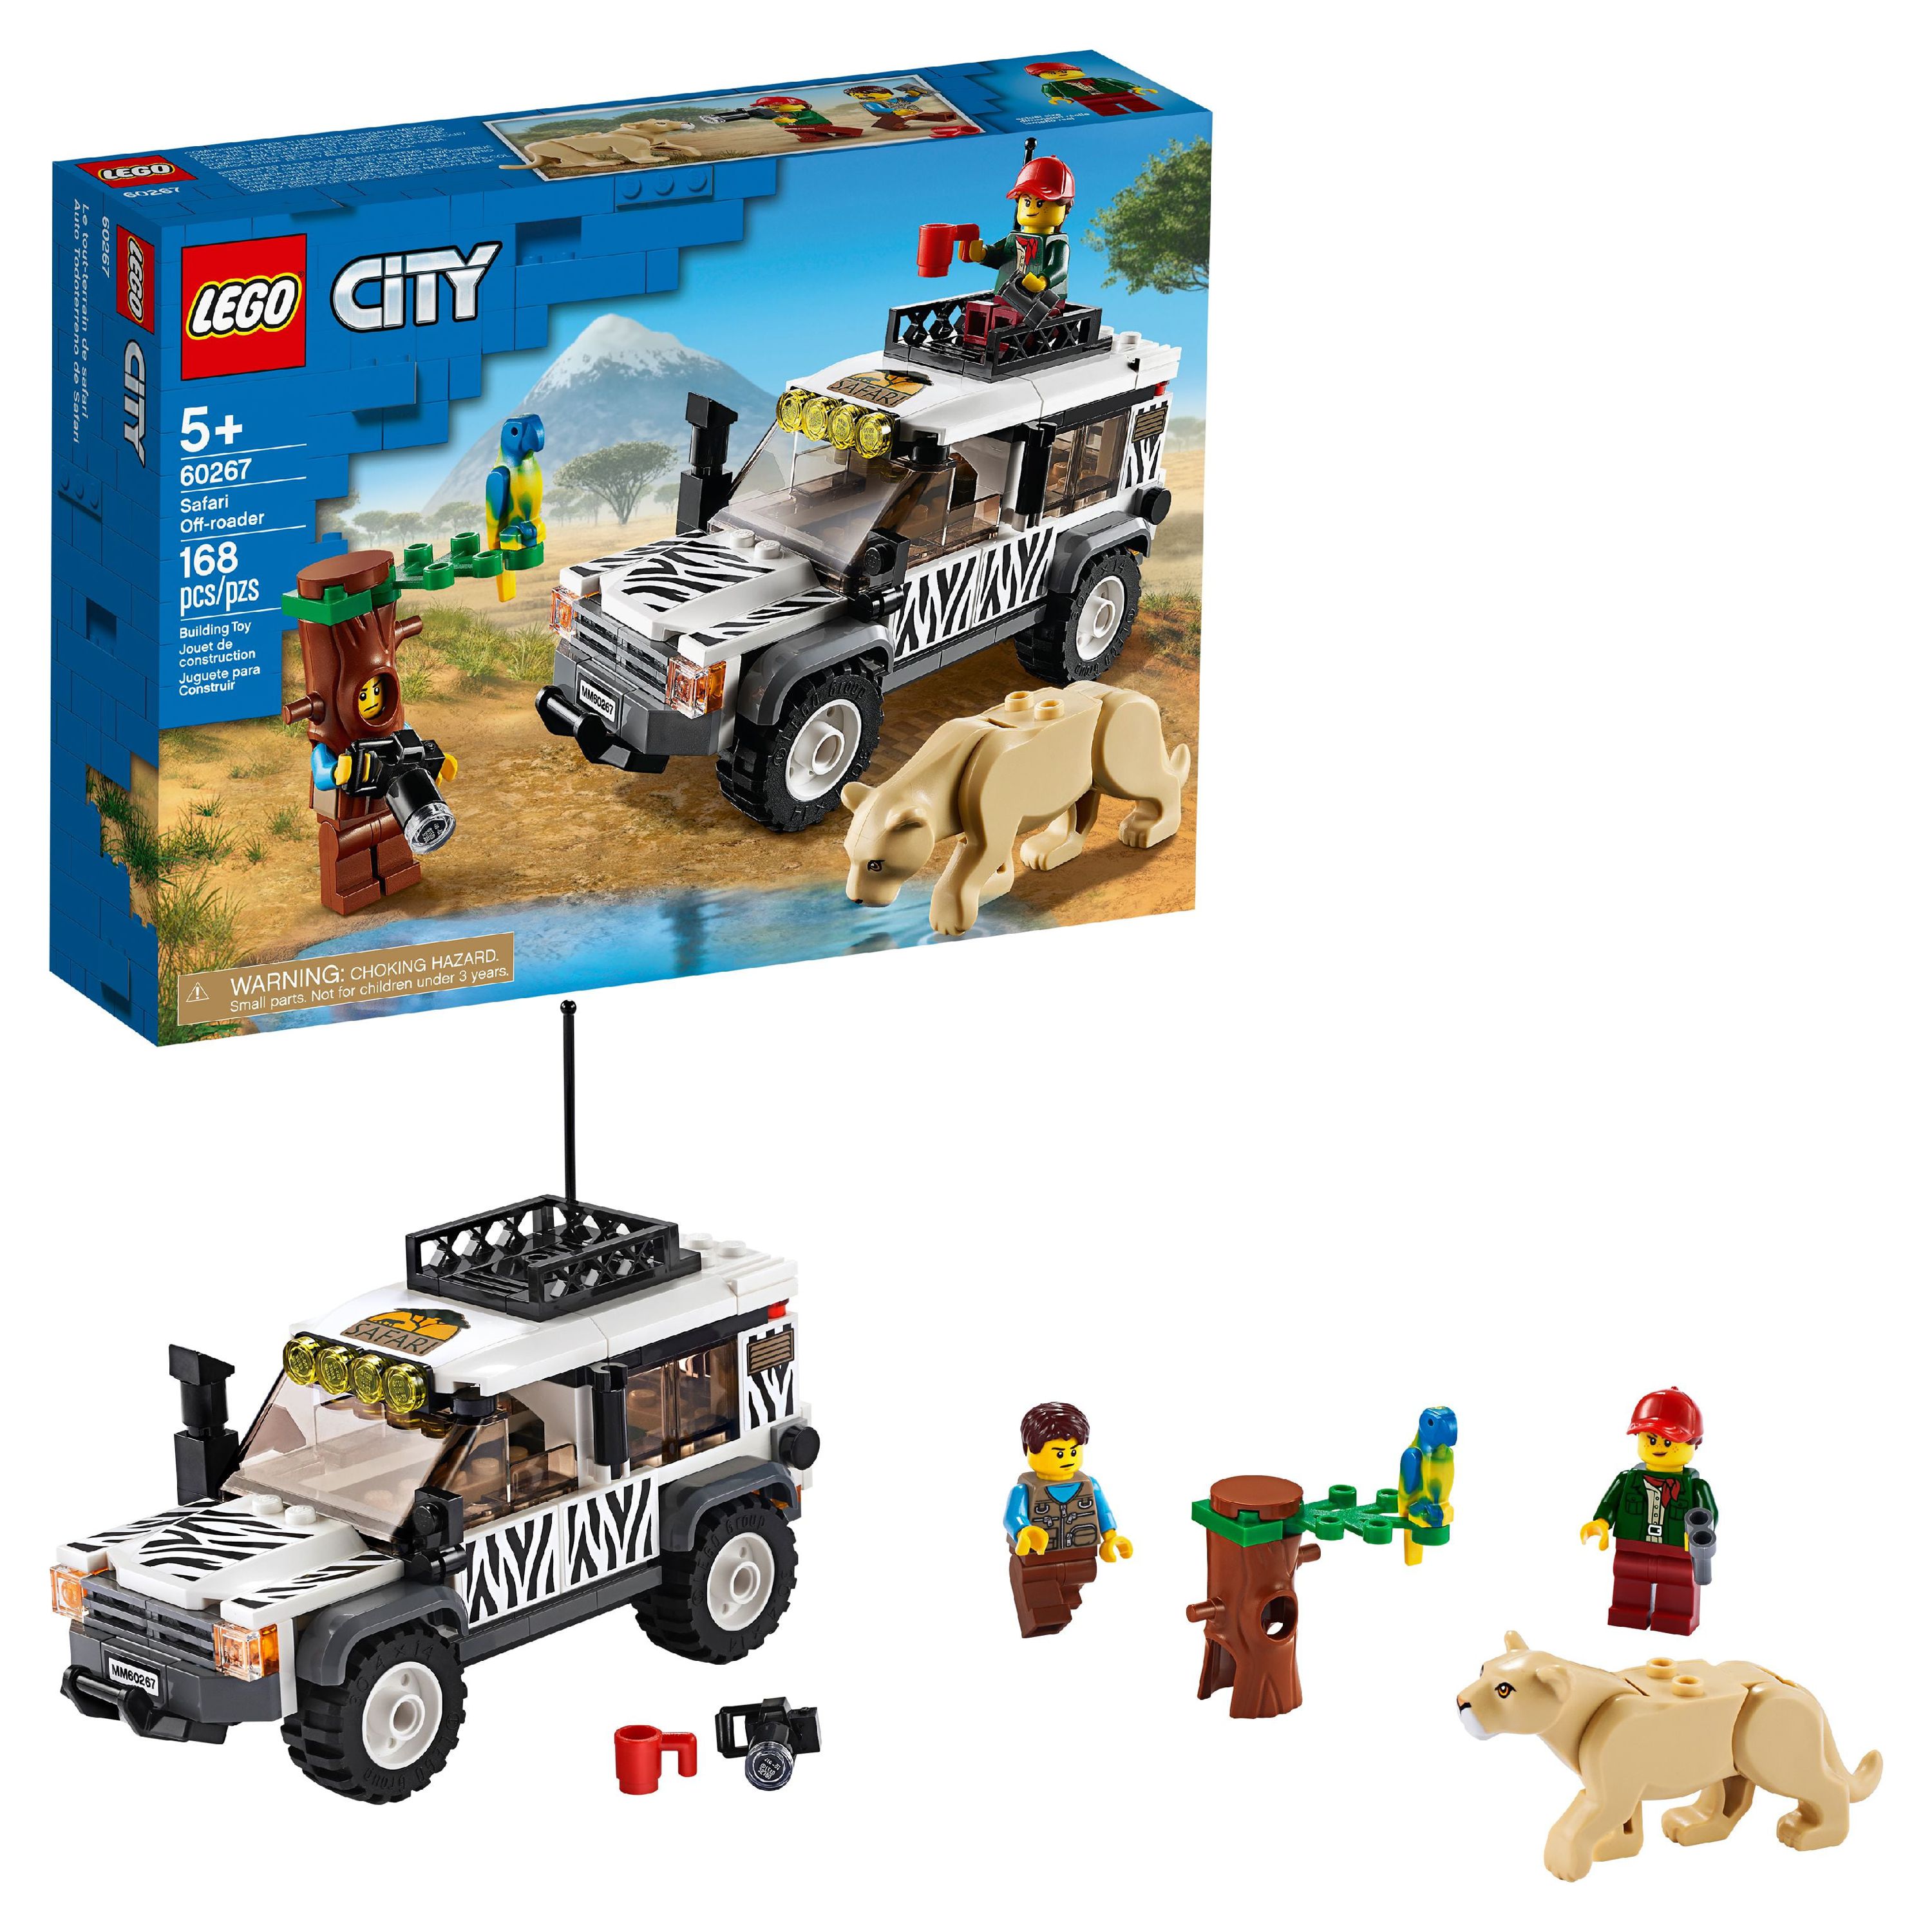 LEGO City Safari Off-Roader 60267 Building Kit for Kids (168 Pieces) - image 1 of 7